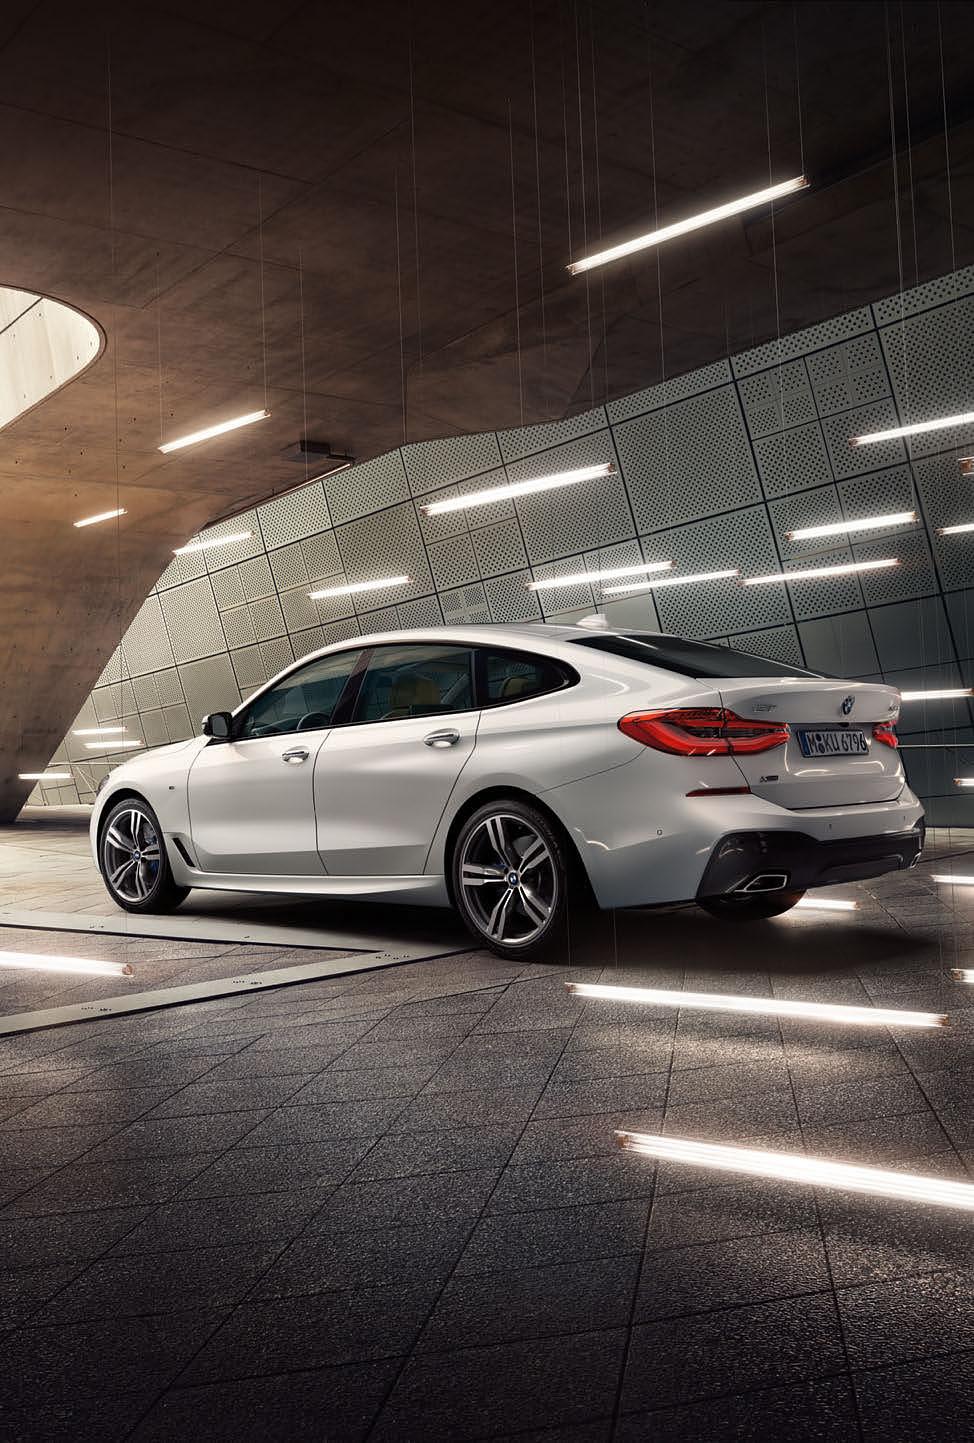 Sheer Driving Pleasure THE FIRST BMW 6 SERIES GRAN TURISMO.